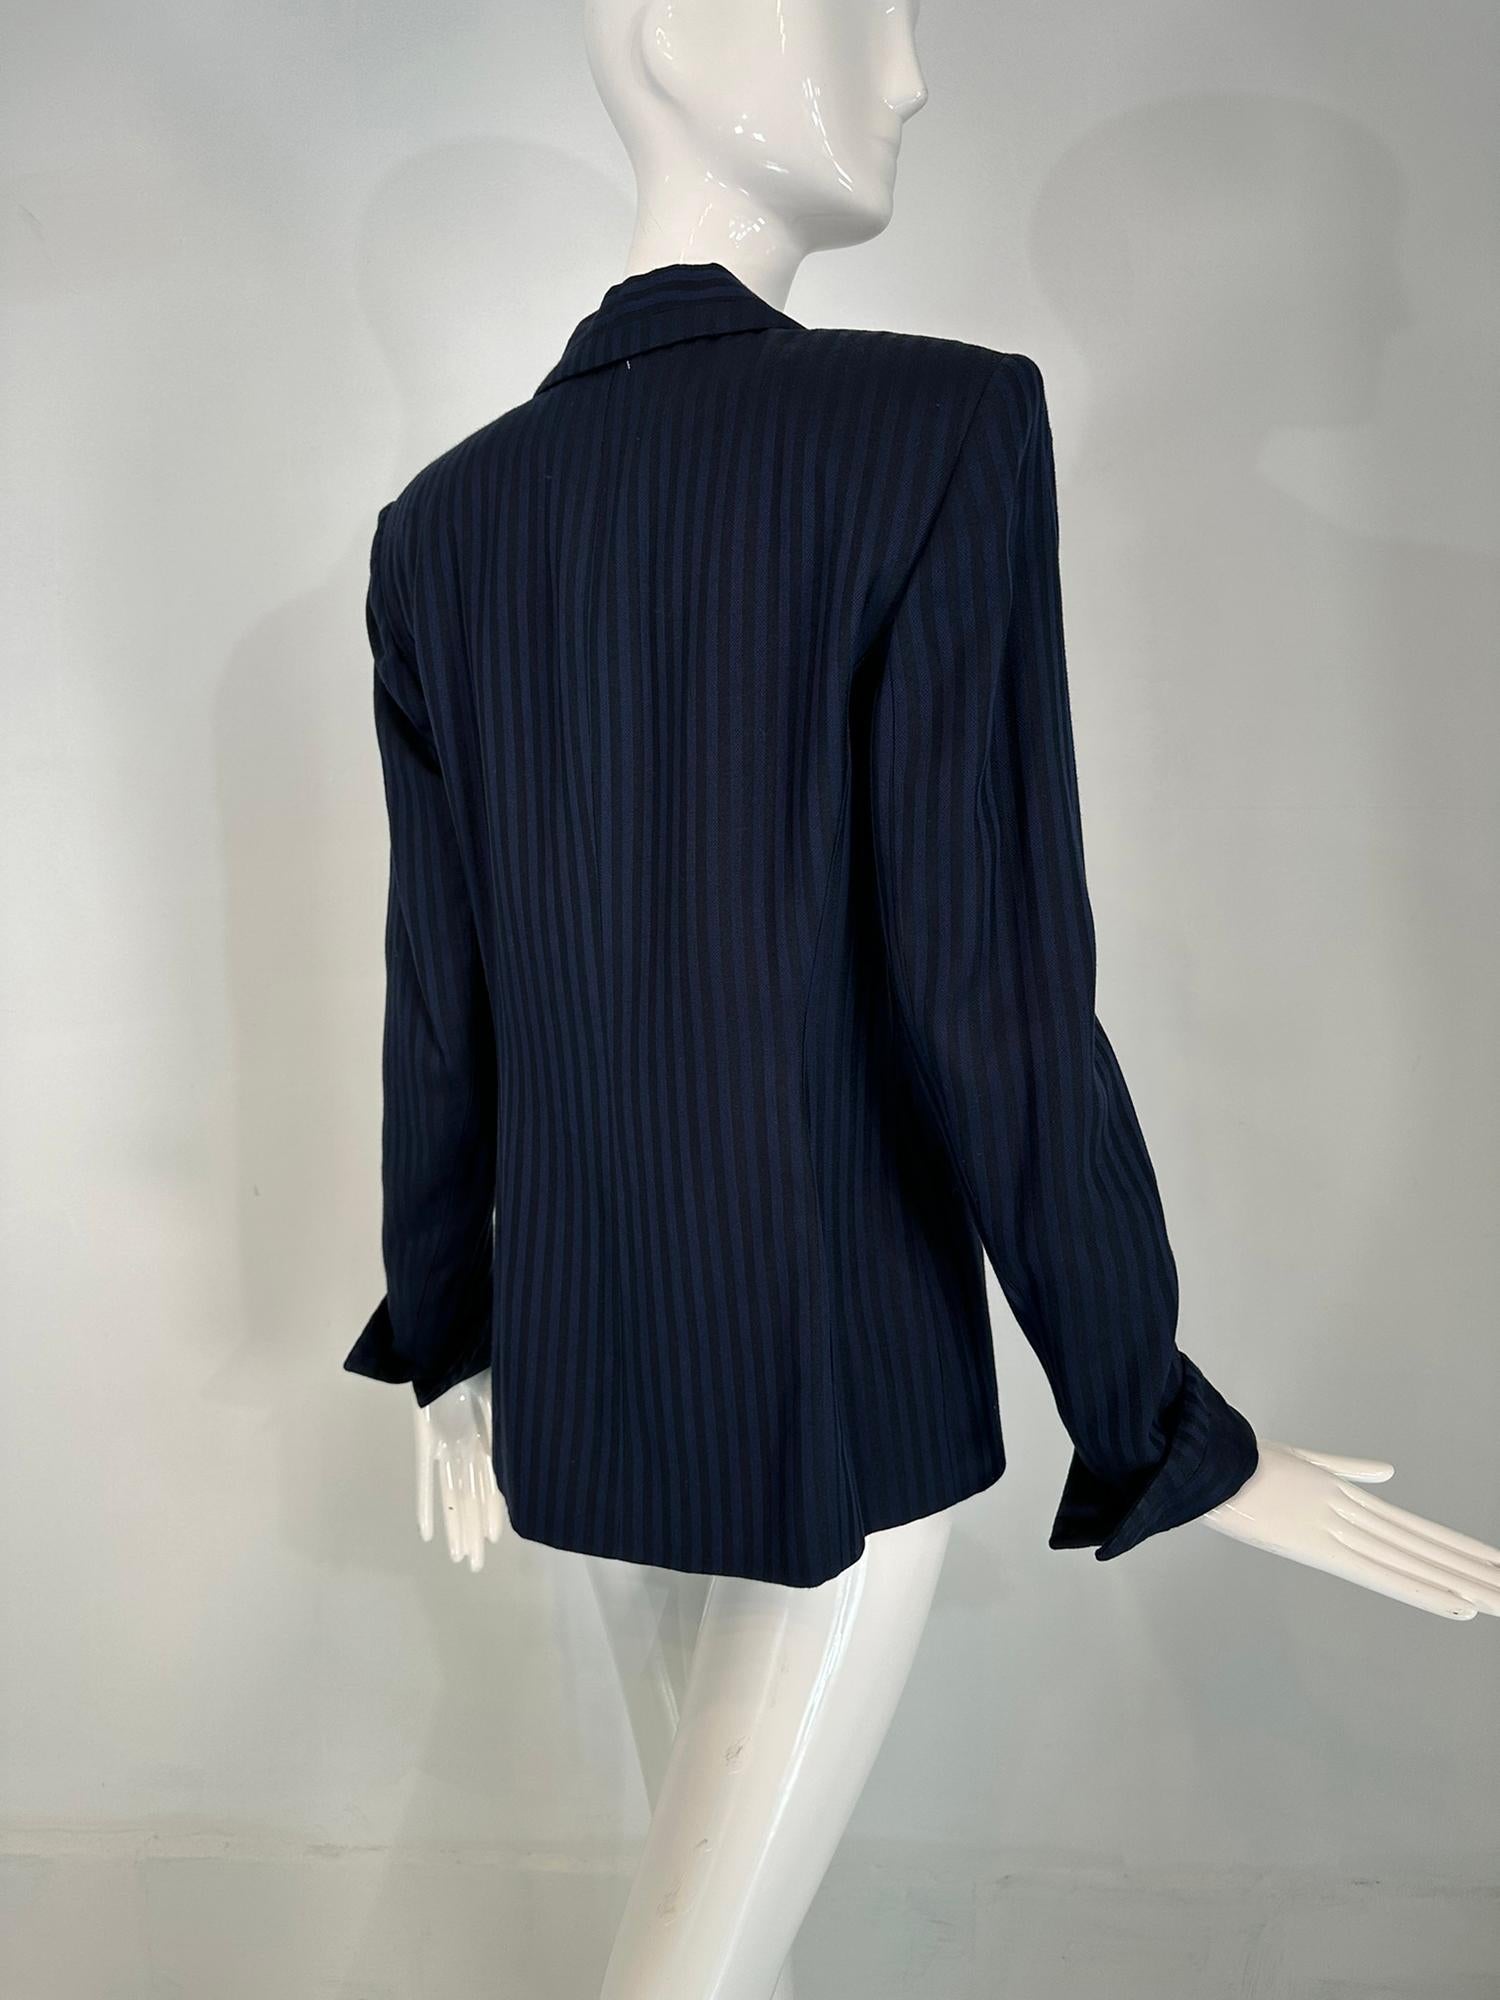 Christian Dior Navy Blue & Black Wide Stripe Wool Twill Jacket Late 90s-2000s 4 For Sale 2